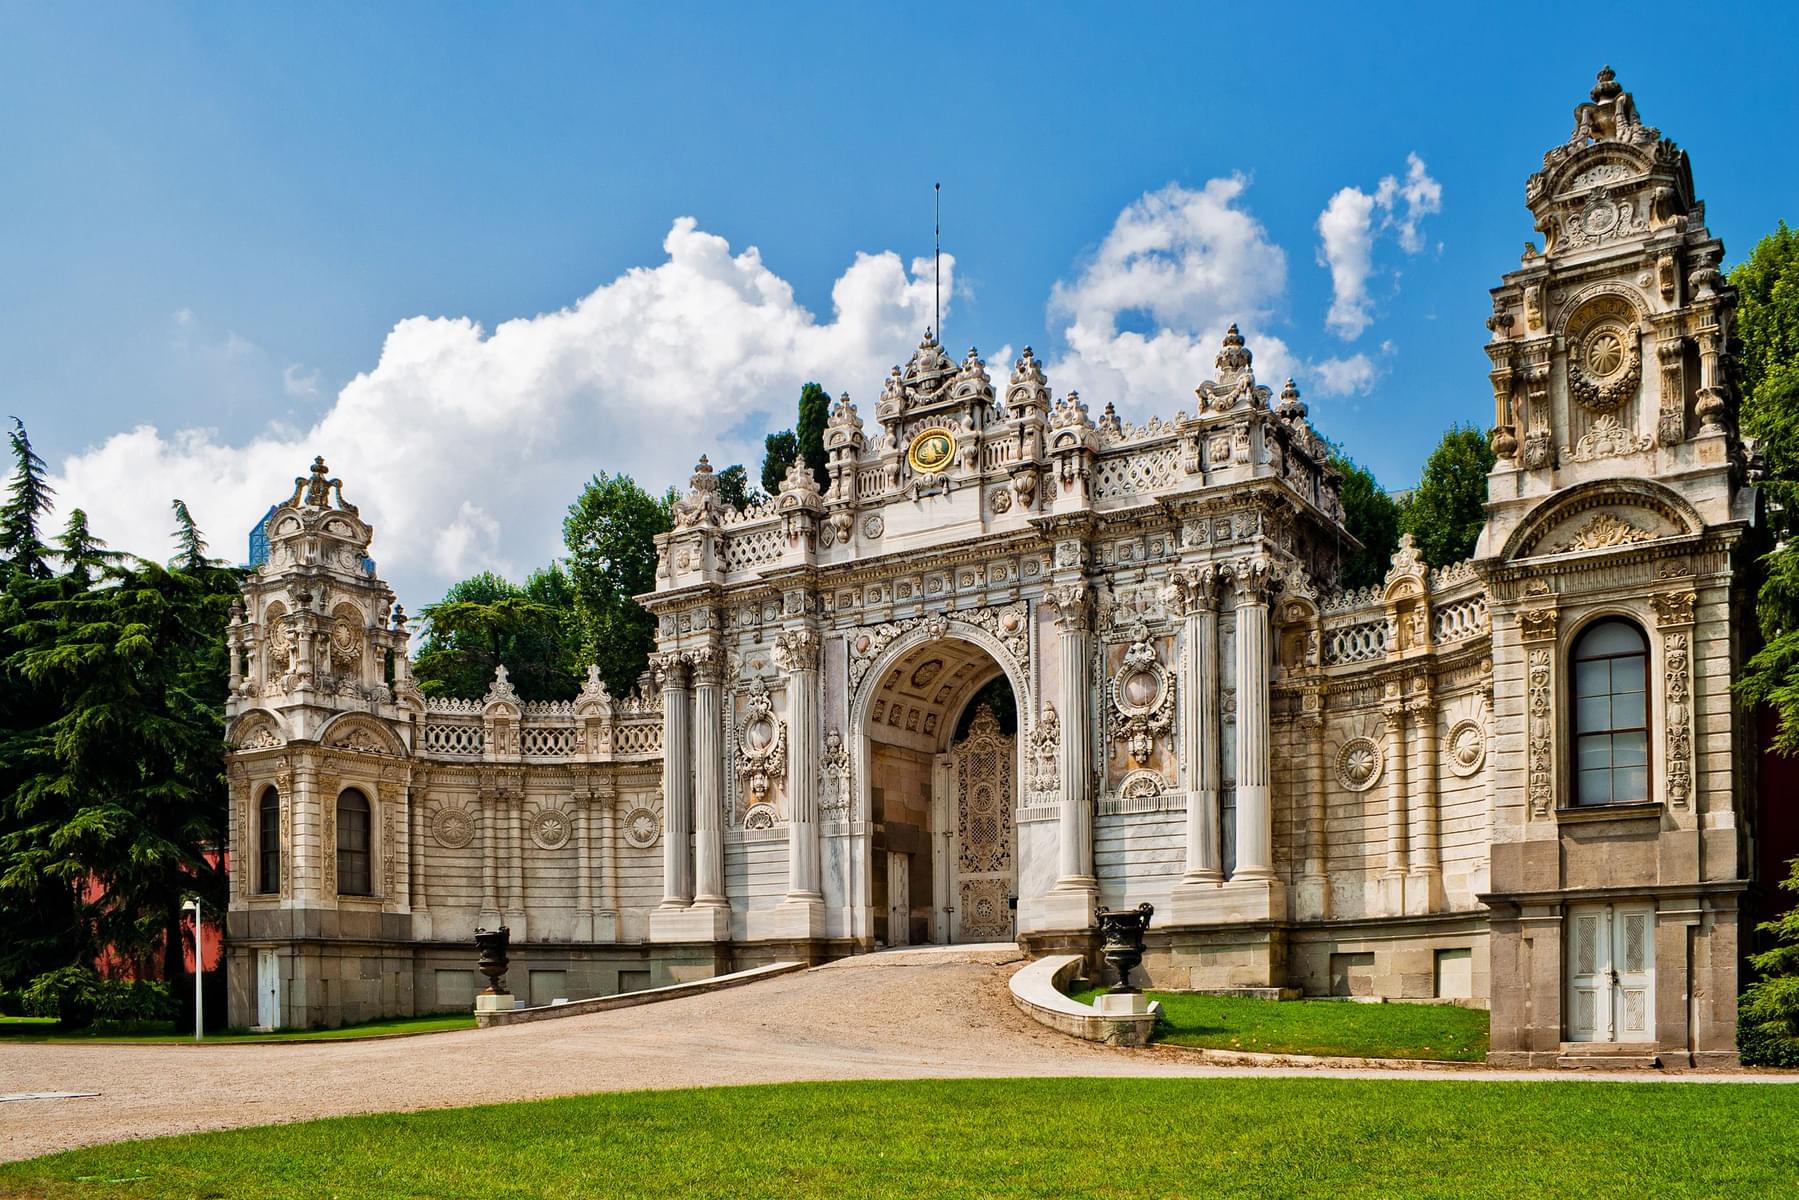  Explore Dolmabahce Palace